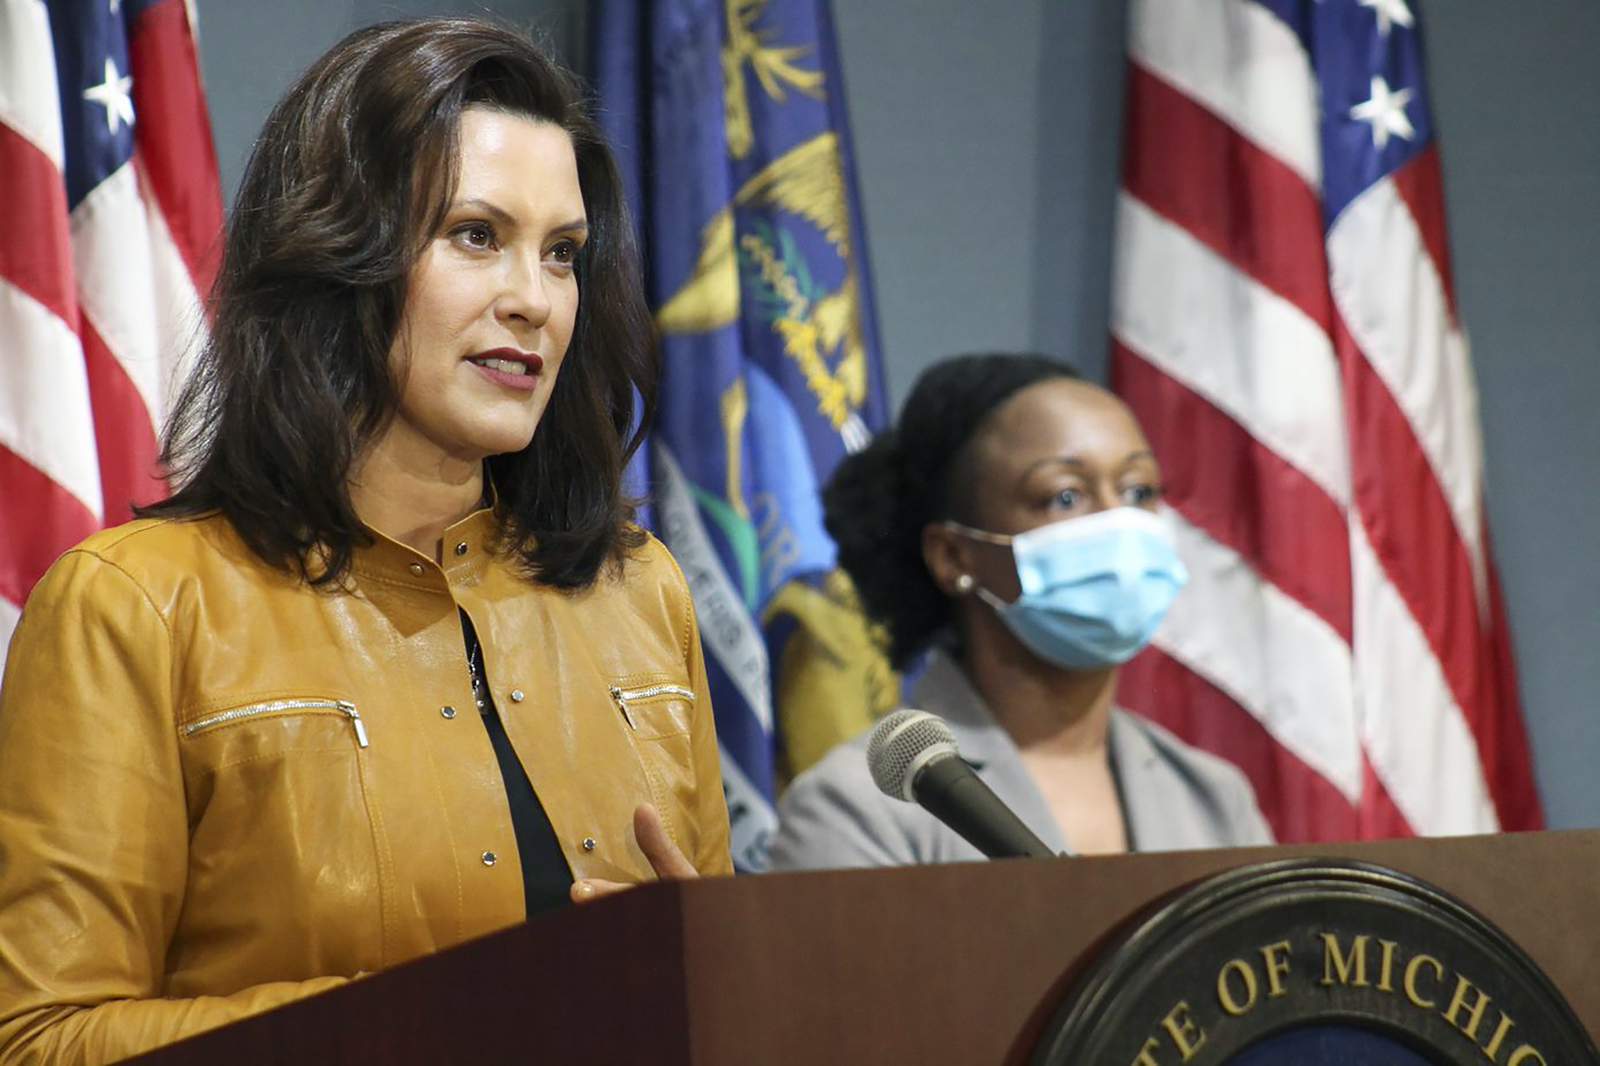 Gov. Whitmer announces Michigan will not move to phase 5 of reopening plan before July 4 weekend